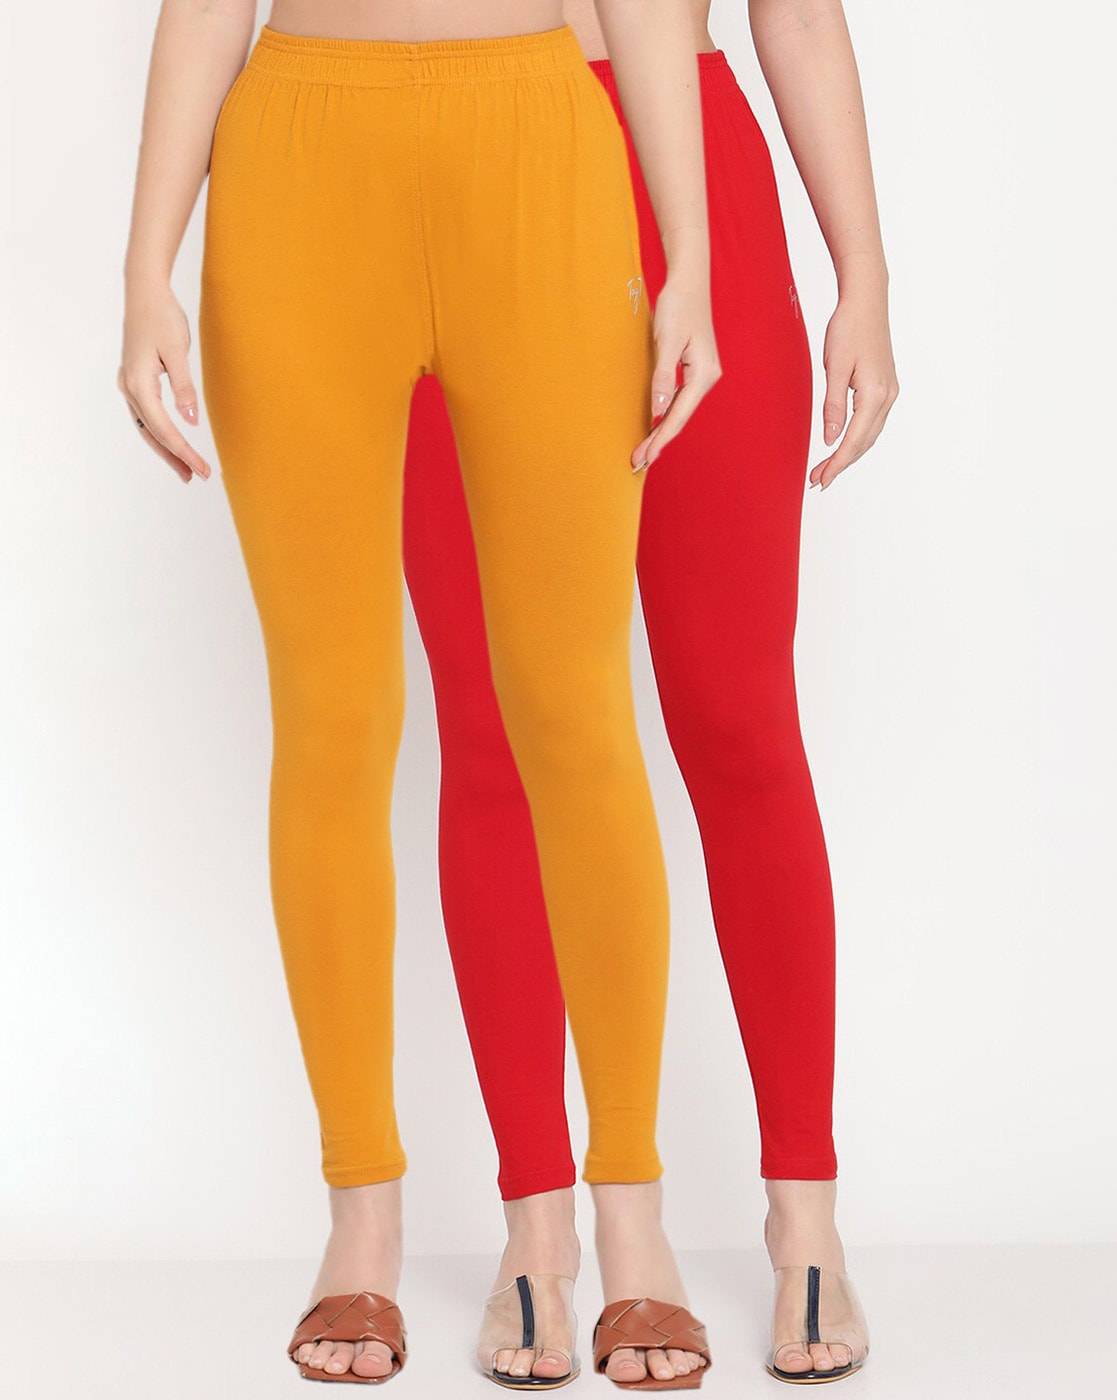 Yellow Cotton Legging – Zubix : Clothing, Accessories and Home Furnishing  Shop Online